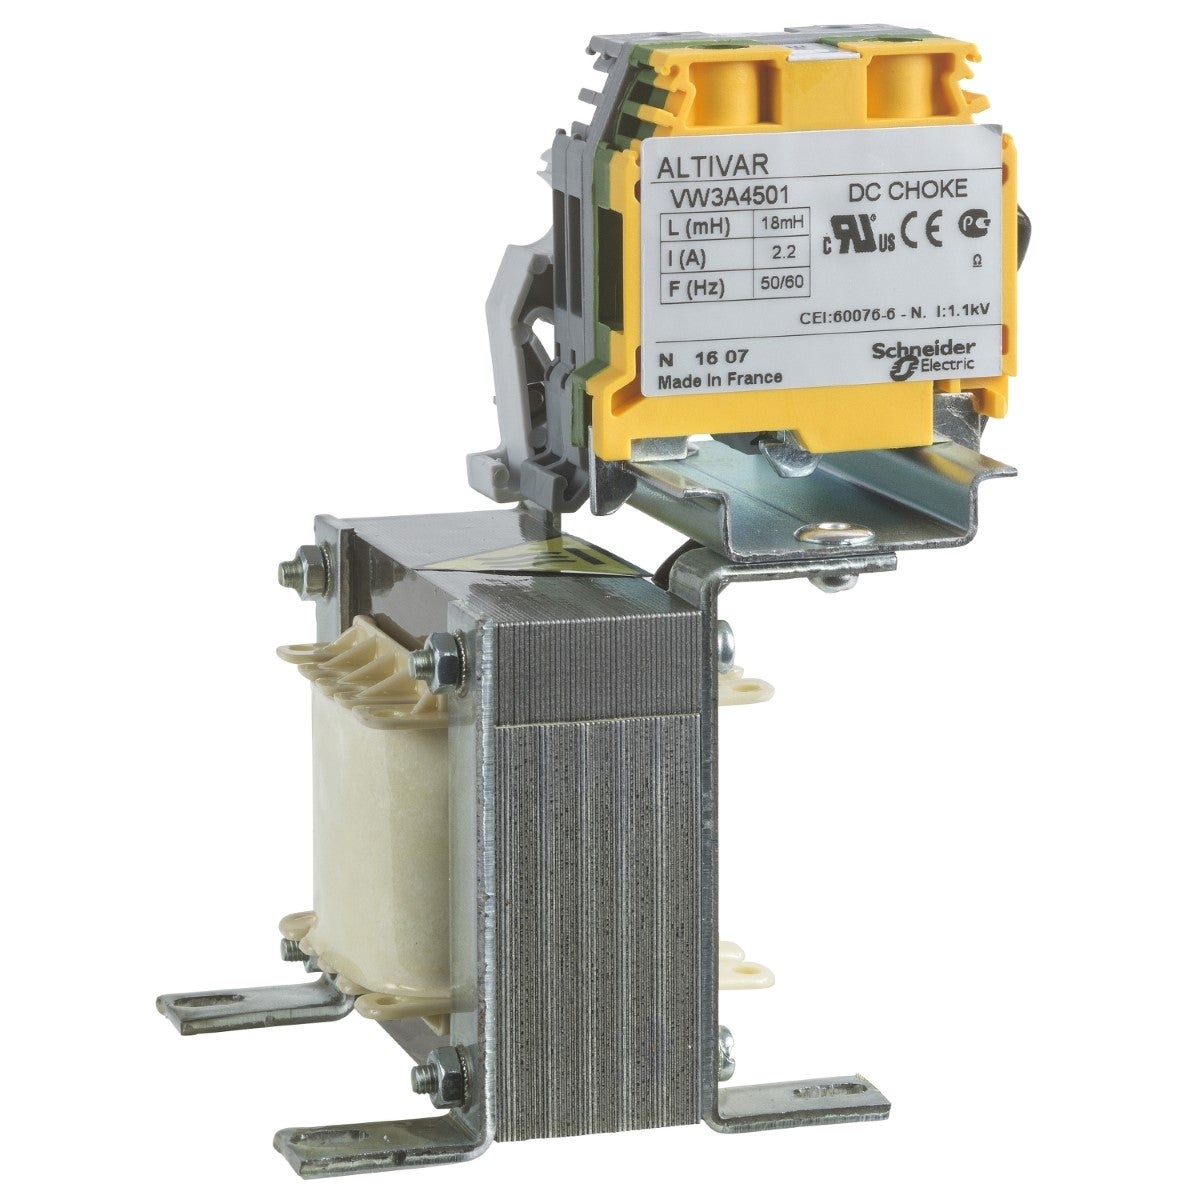 DC choke - 0.22 mH - 171 A - for variable speed drive